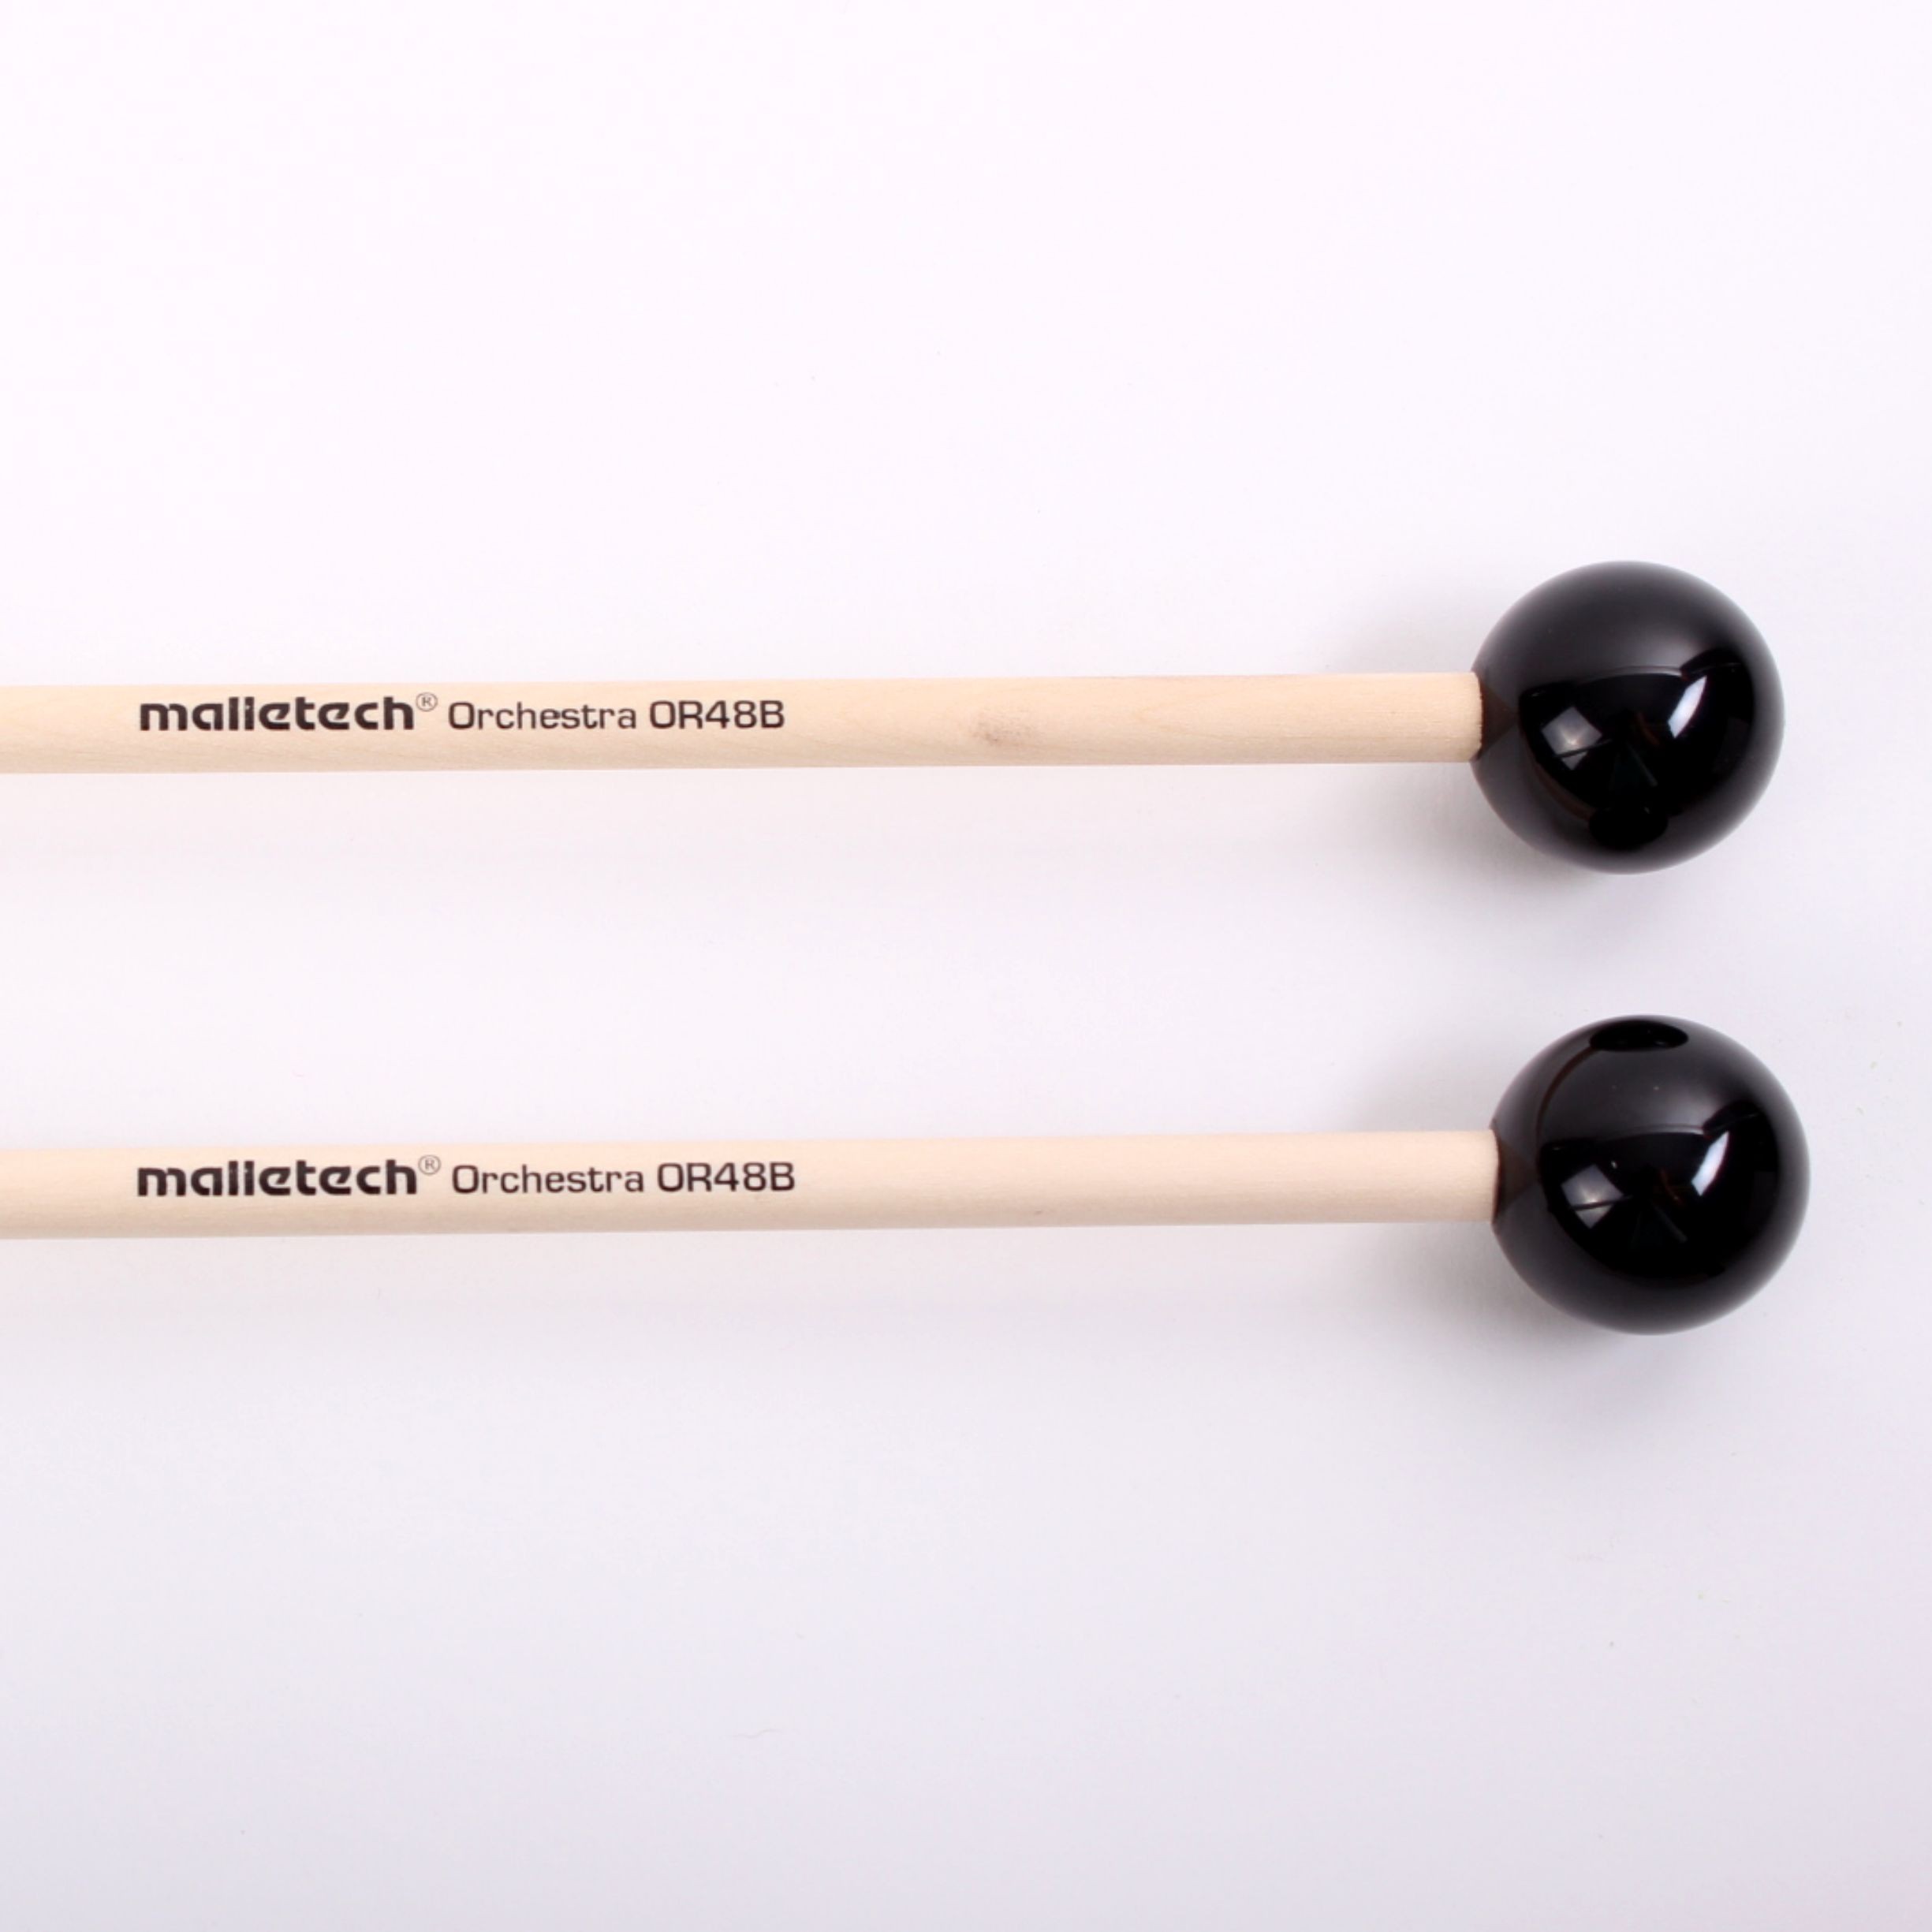 Malletech OR48 Orchestral Series Extra Hard and Heavy Glockenspiel Mallets